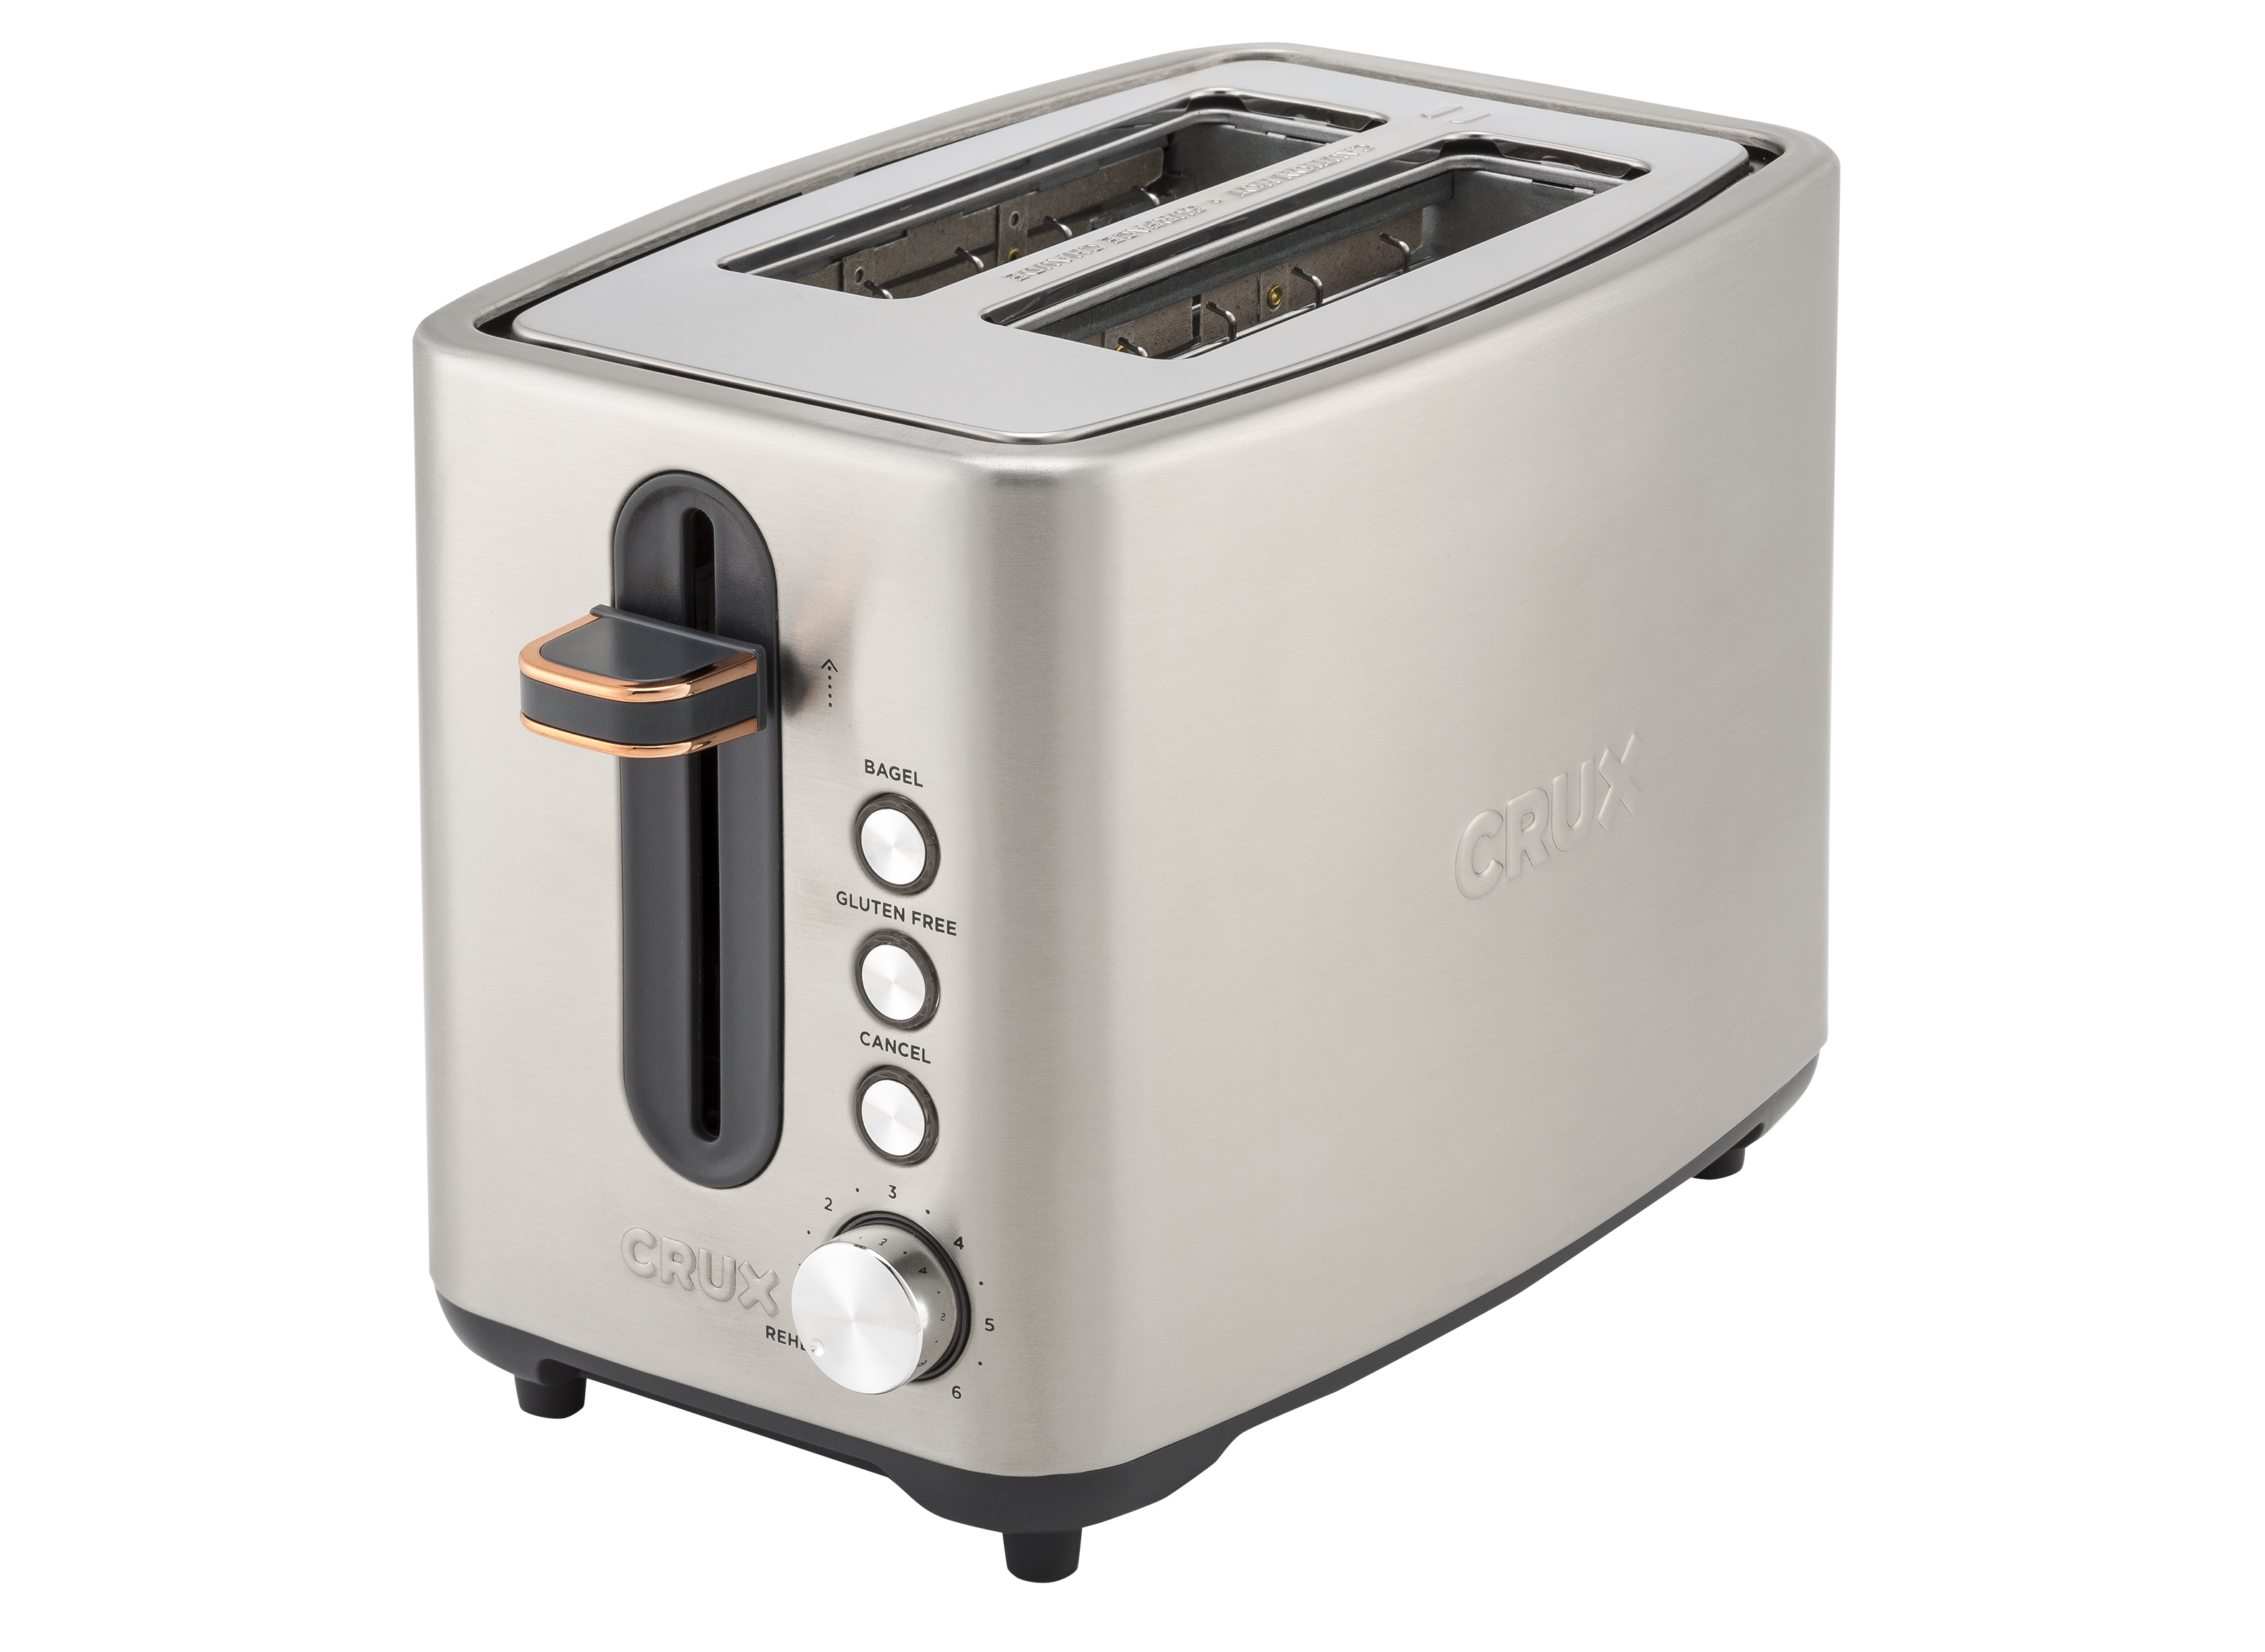 Crux 14544 2-Slice Toaster & Toaster Oven Review - Consumer Reports